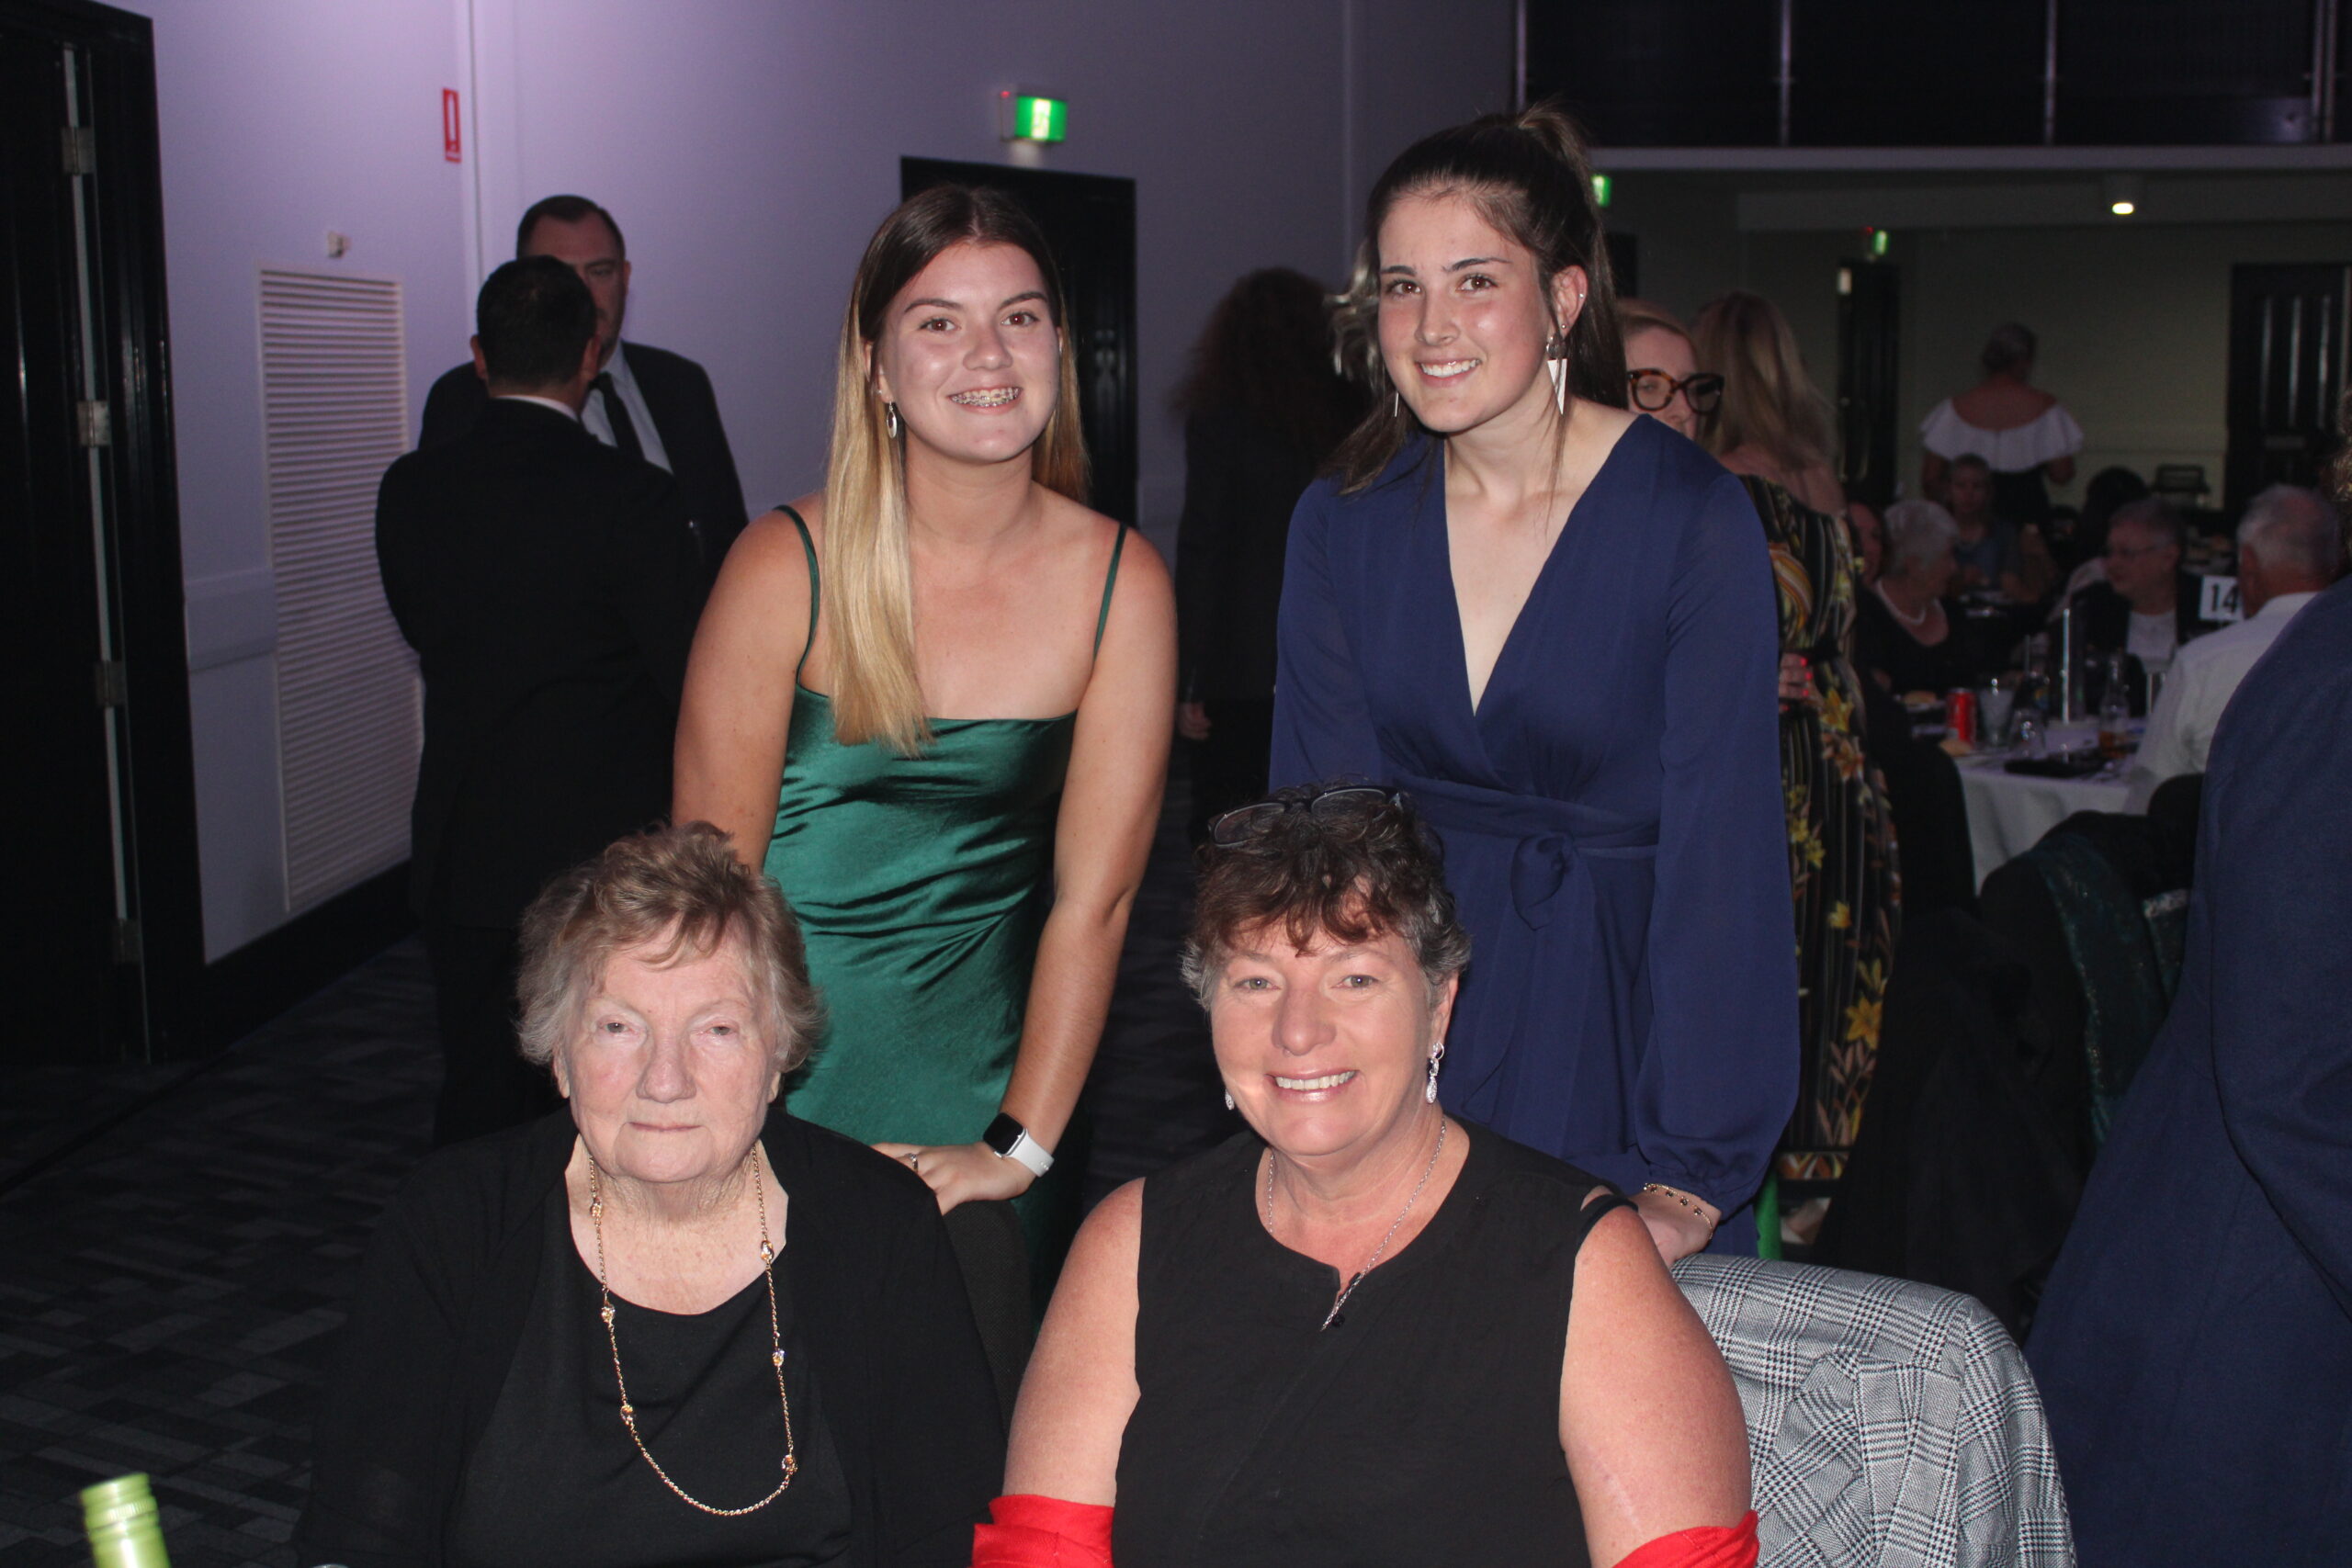 Back, Cassidy Staines, Maddie Russell, front, Jan Busby and Trudy Staines.